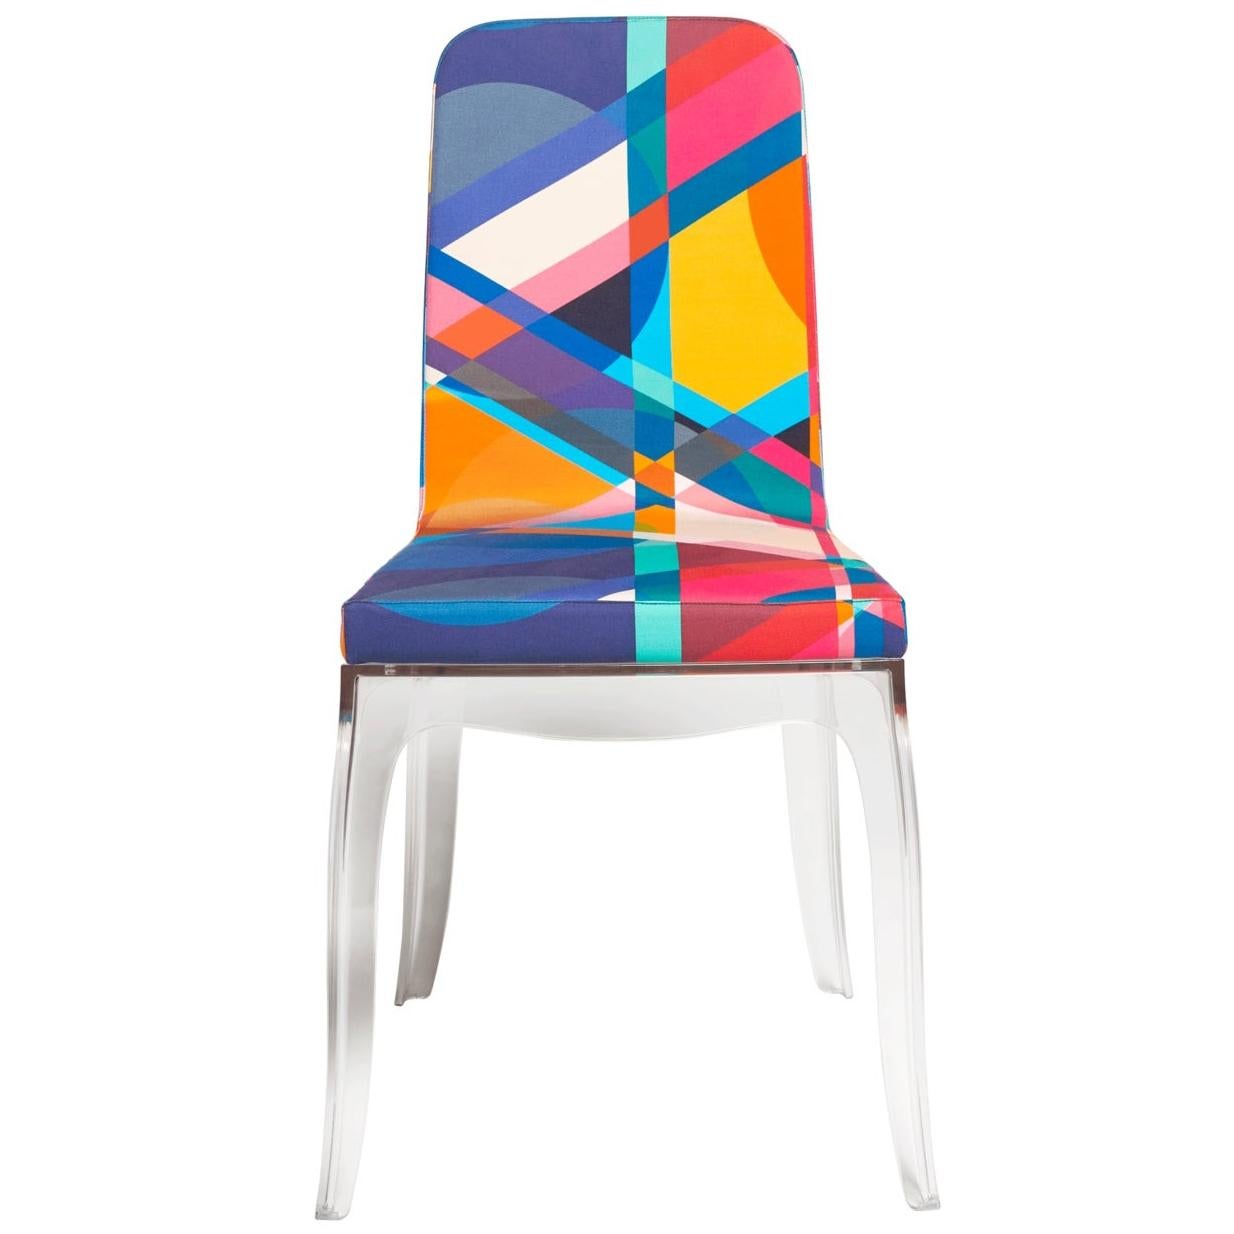 Moibibi Colorful Dining Chair, Designed by Marcel Wanders, Made in Italy